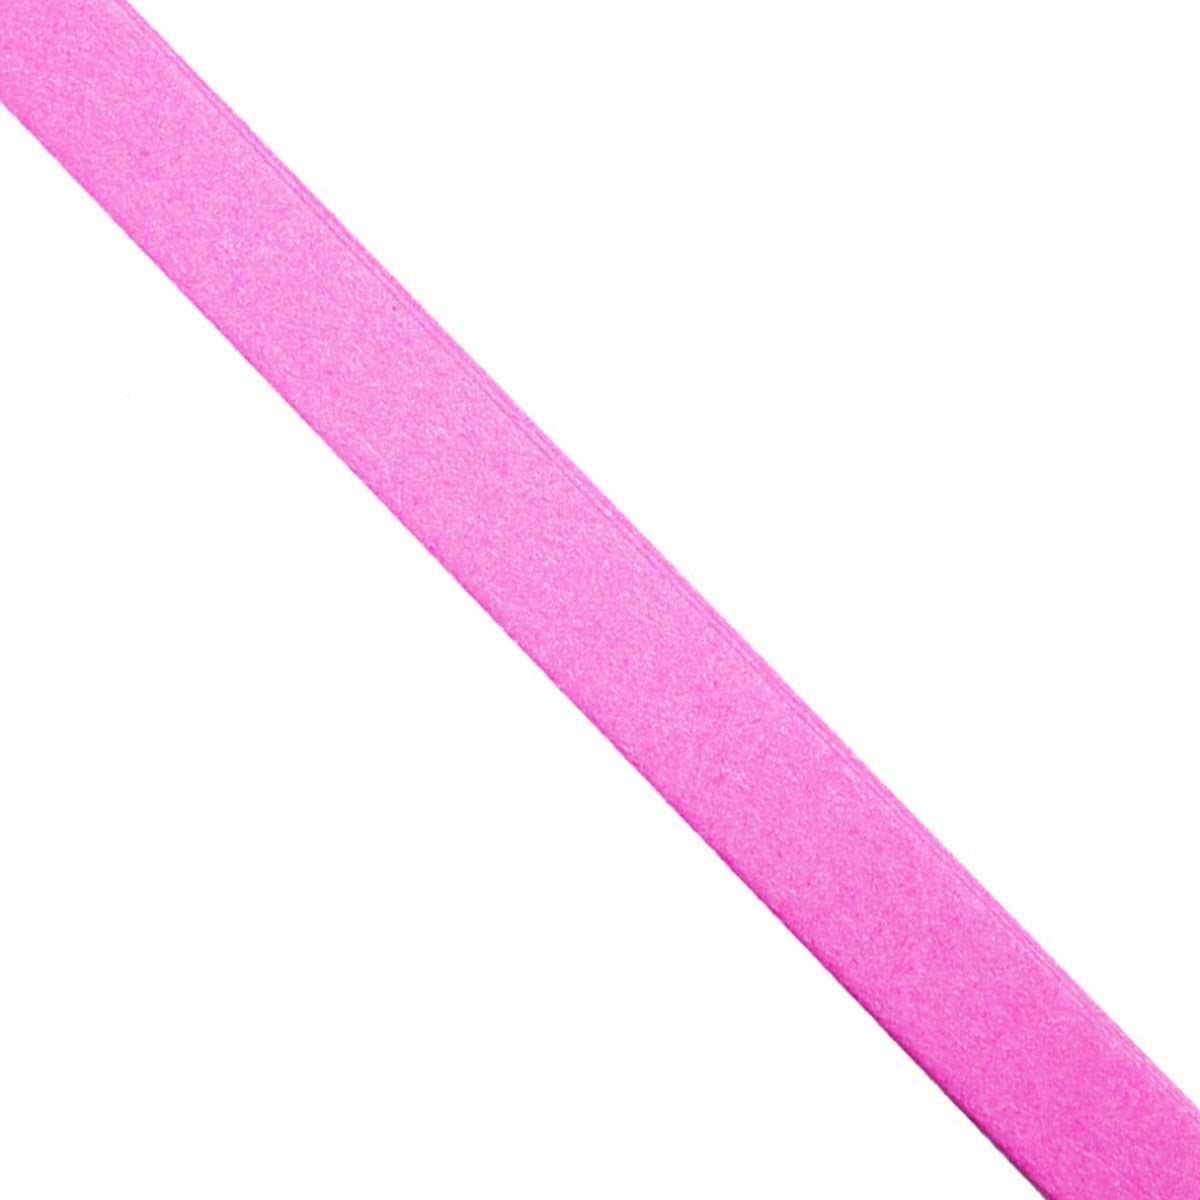 jags-mumbai Qilling Paper Magenta 5mm Quilling Strips - High Quality & Affordable